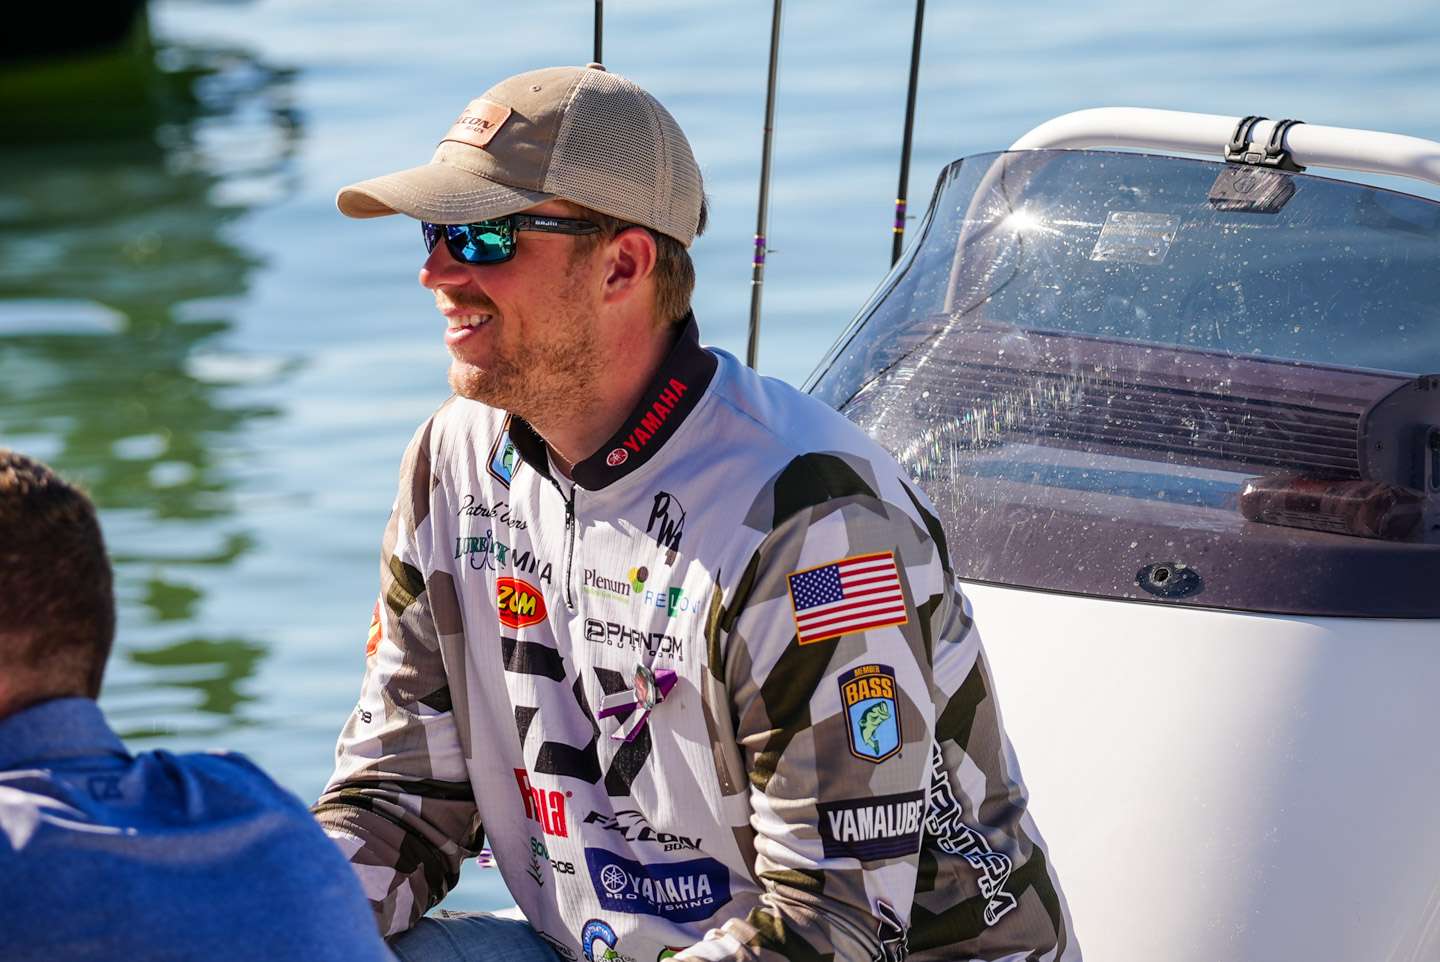 Take a look at all of the behind the scenes action from Championship Sunday of the Yamaha Bassmaster Redfish Cup Championship presented by Skeeter.